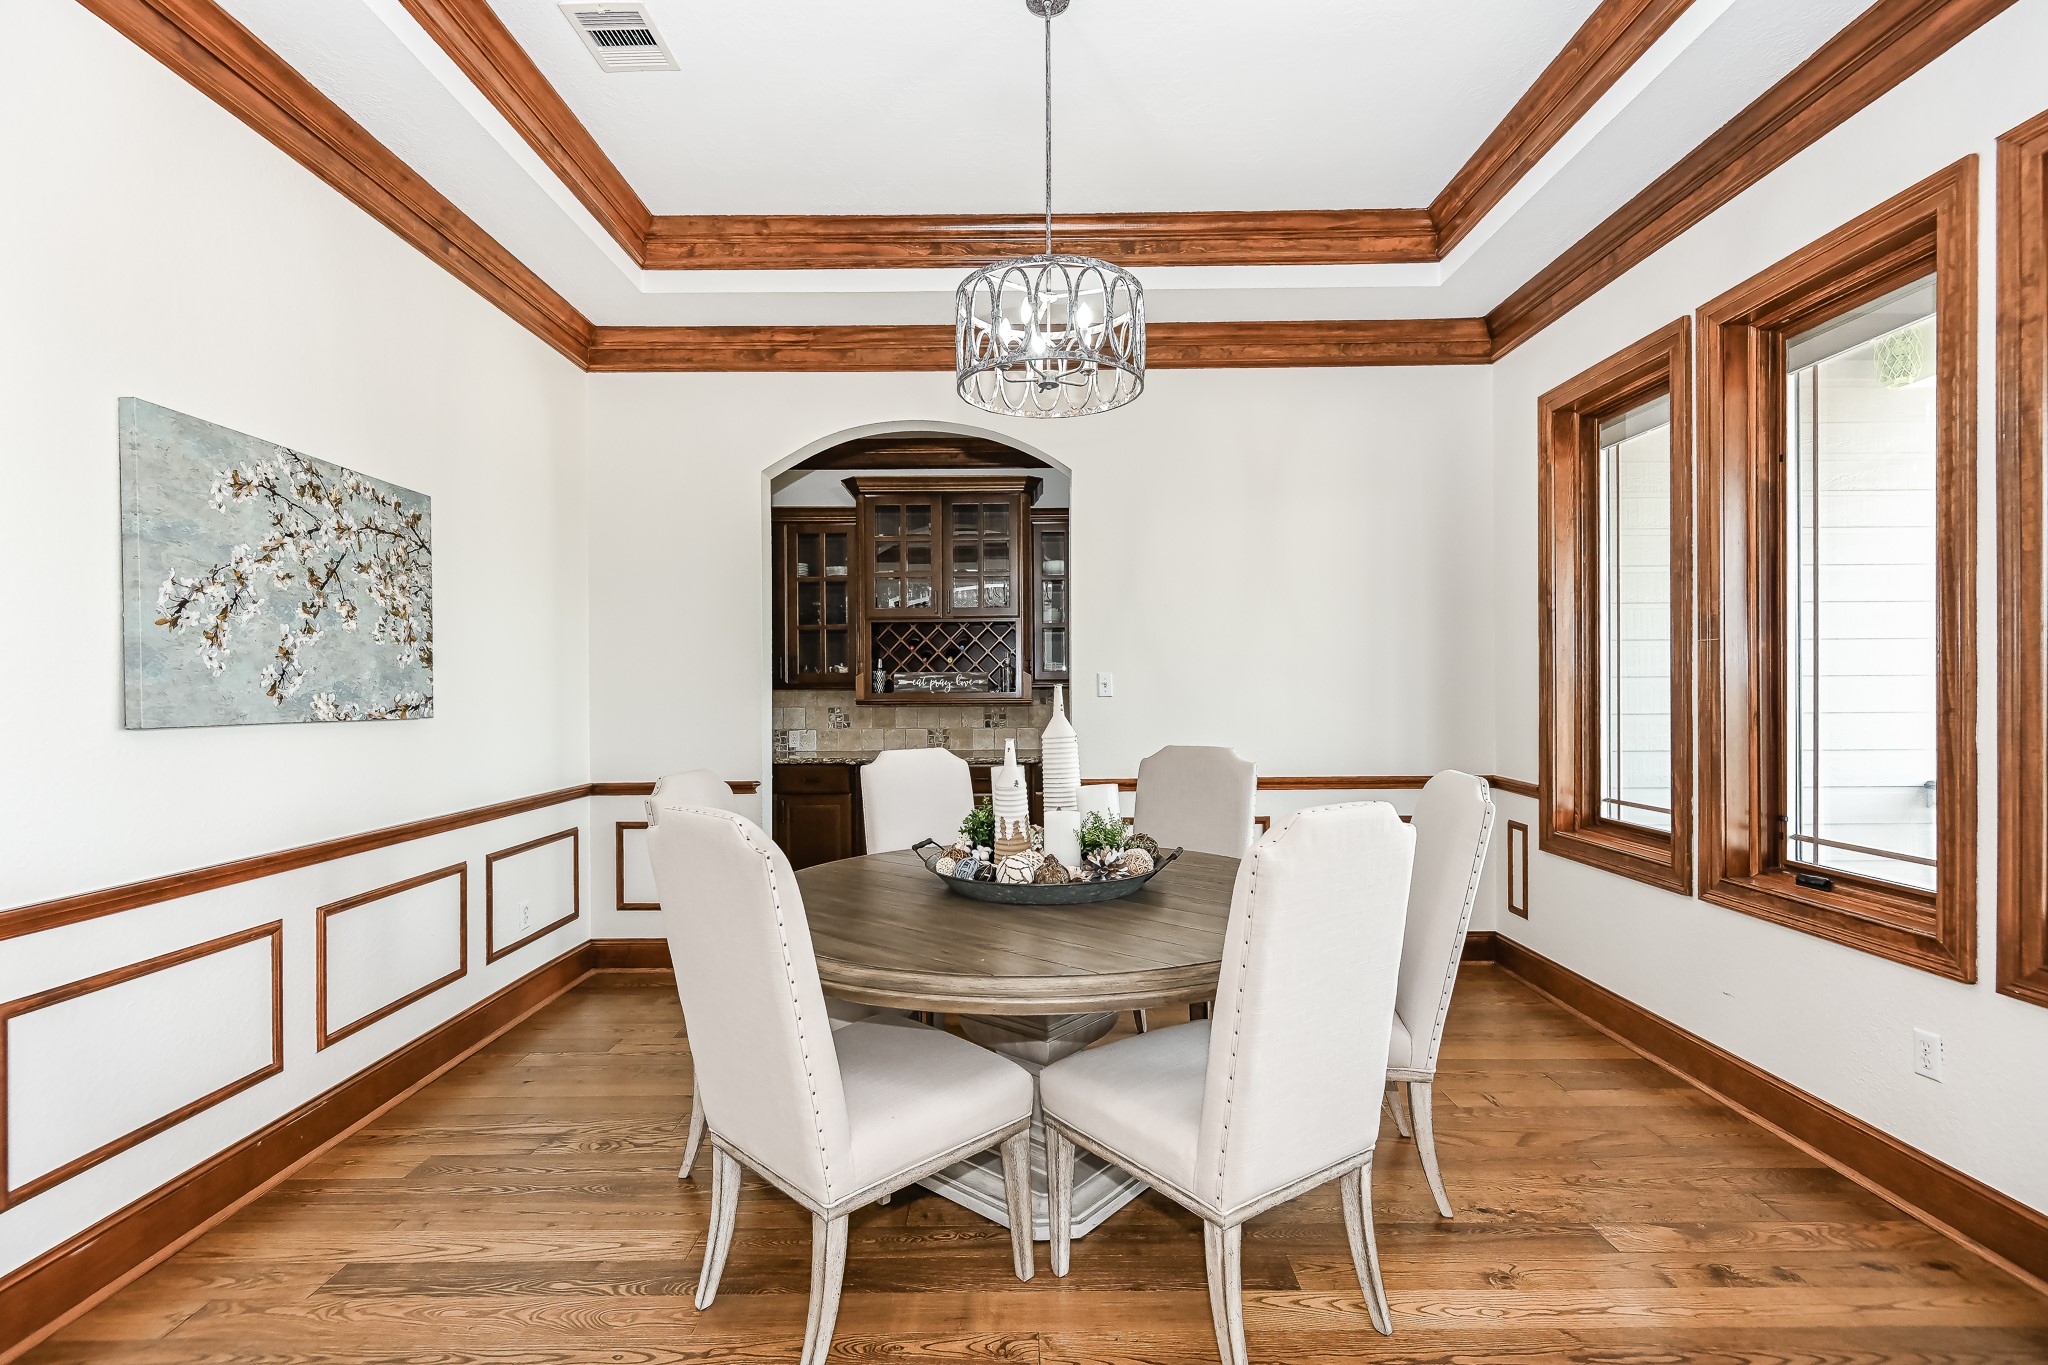 Formal dining is spacious with room for a buffet or china cabinet.